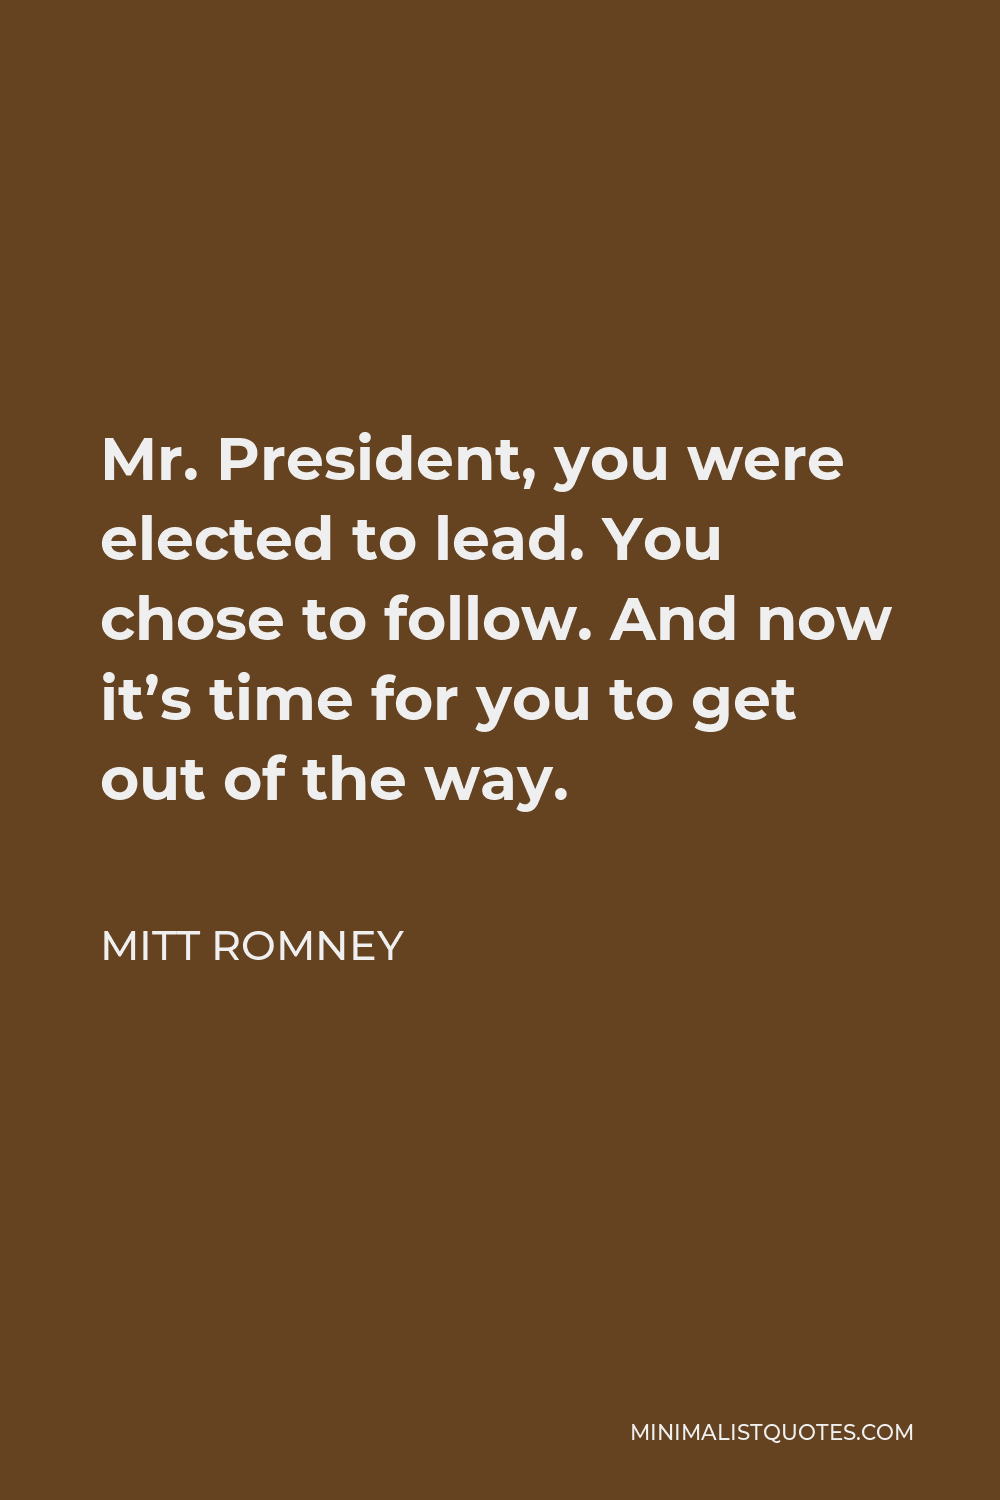 Mitt Romney Quote - Mr. President, you were elected to lead. You chose to follow. And now it’s time for you to get out of the way.